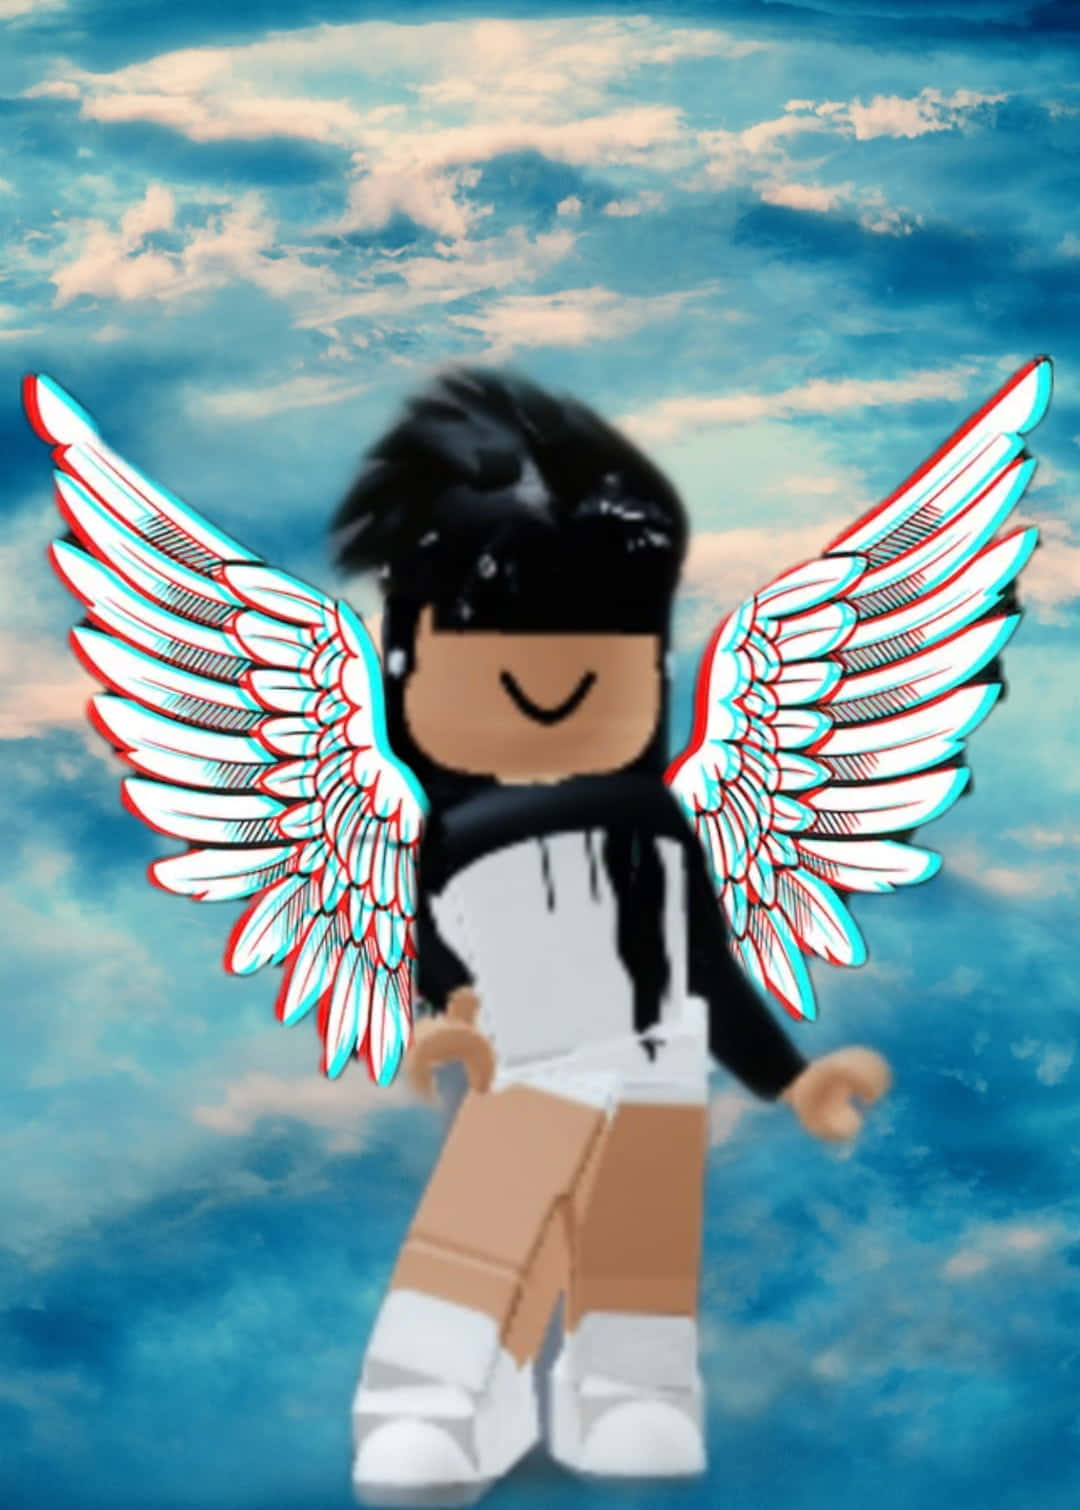 A Lego Angel With Wings In The Sky Background